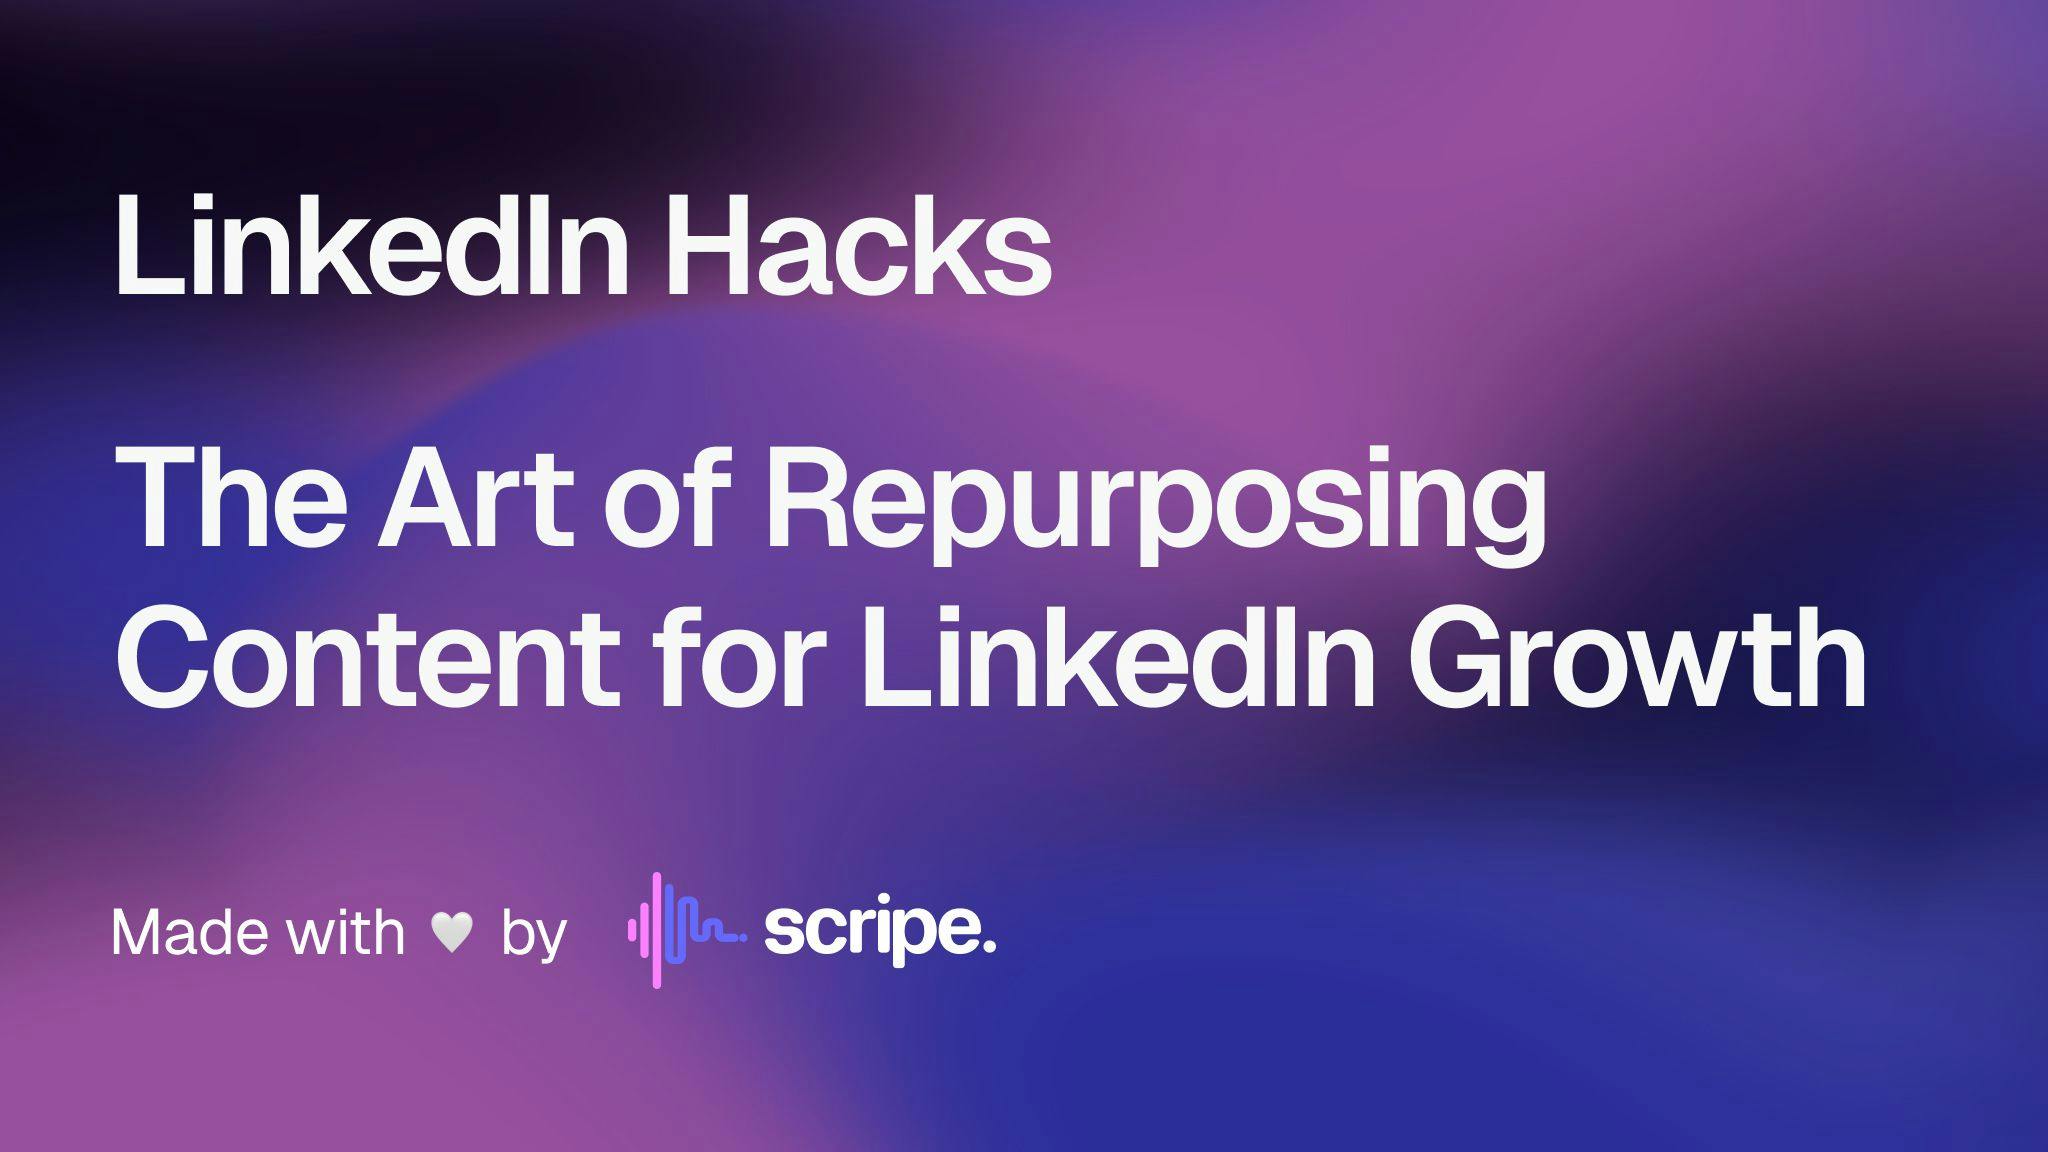 Master the Art of Repurposing Content for LinkedIn Growth